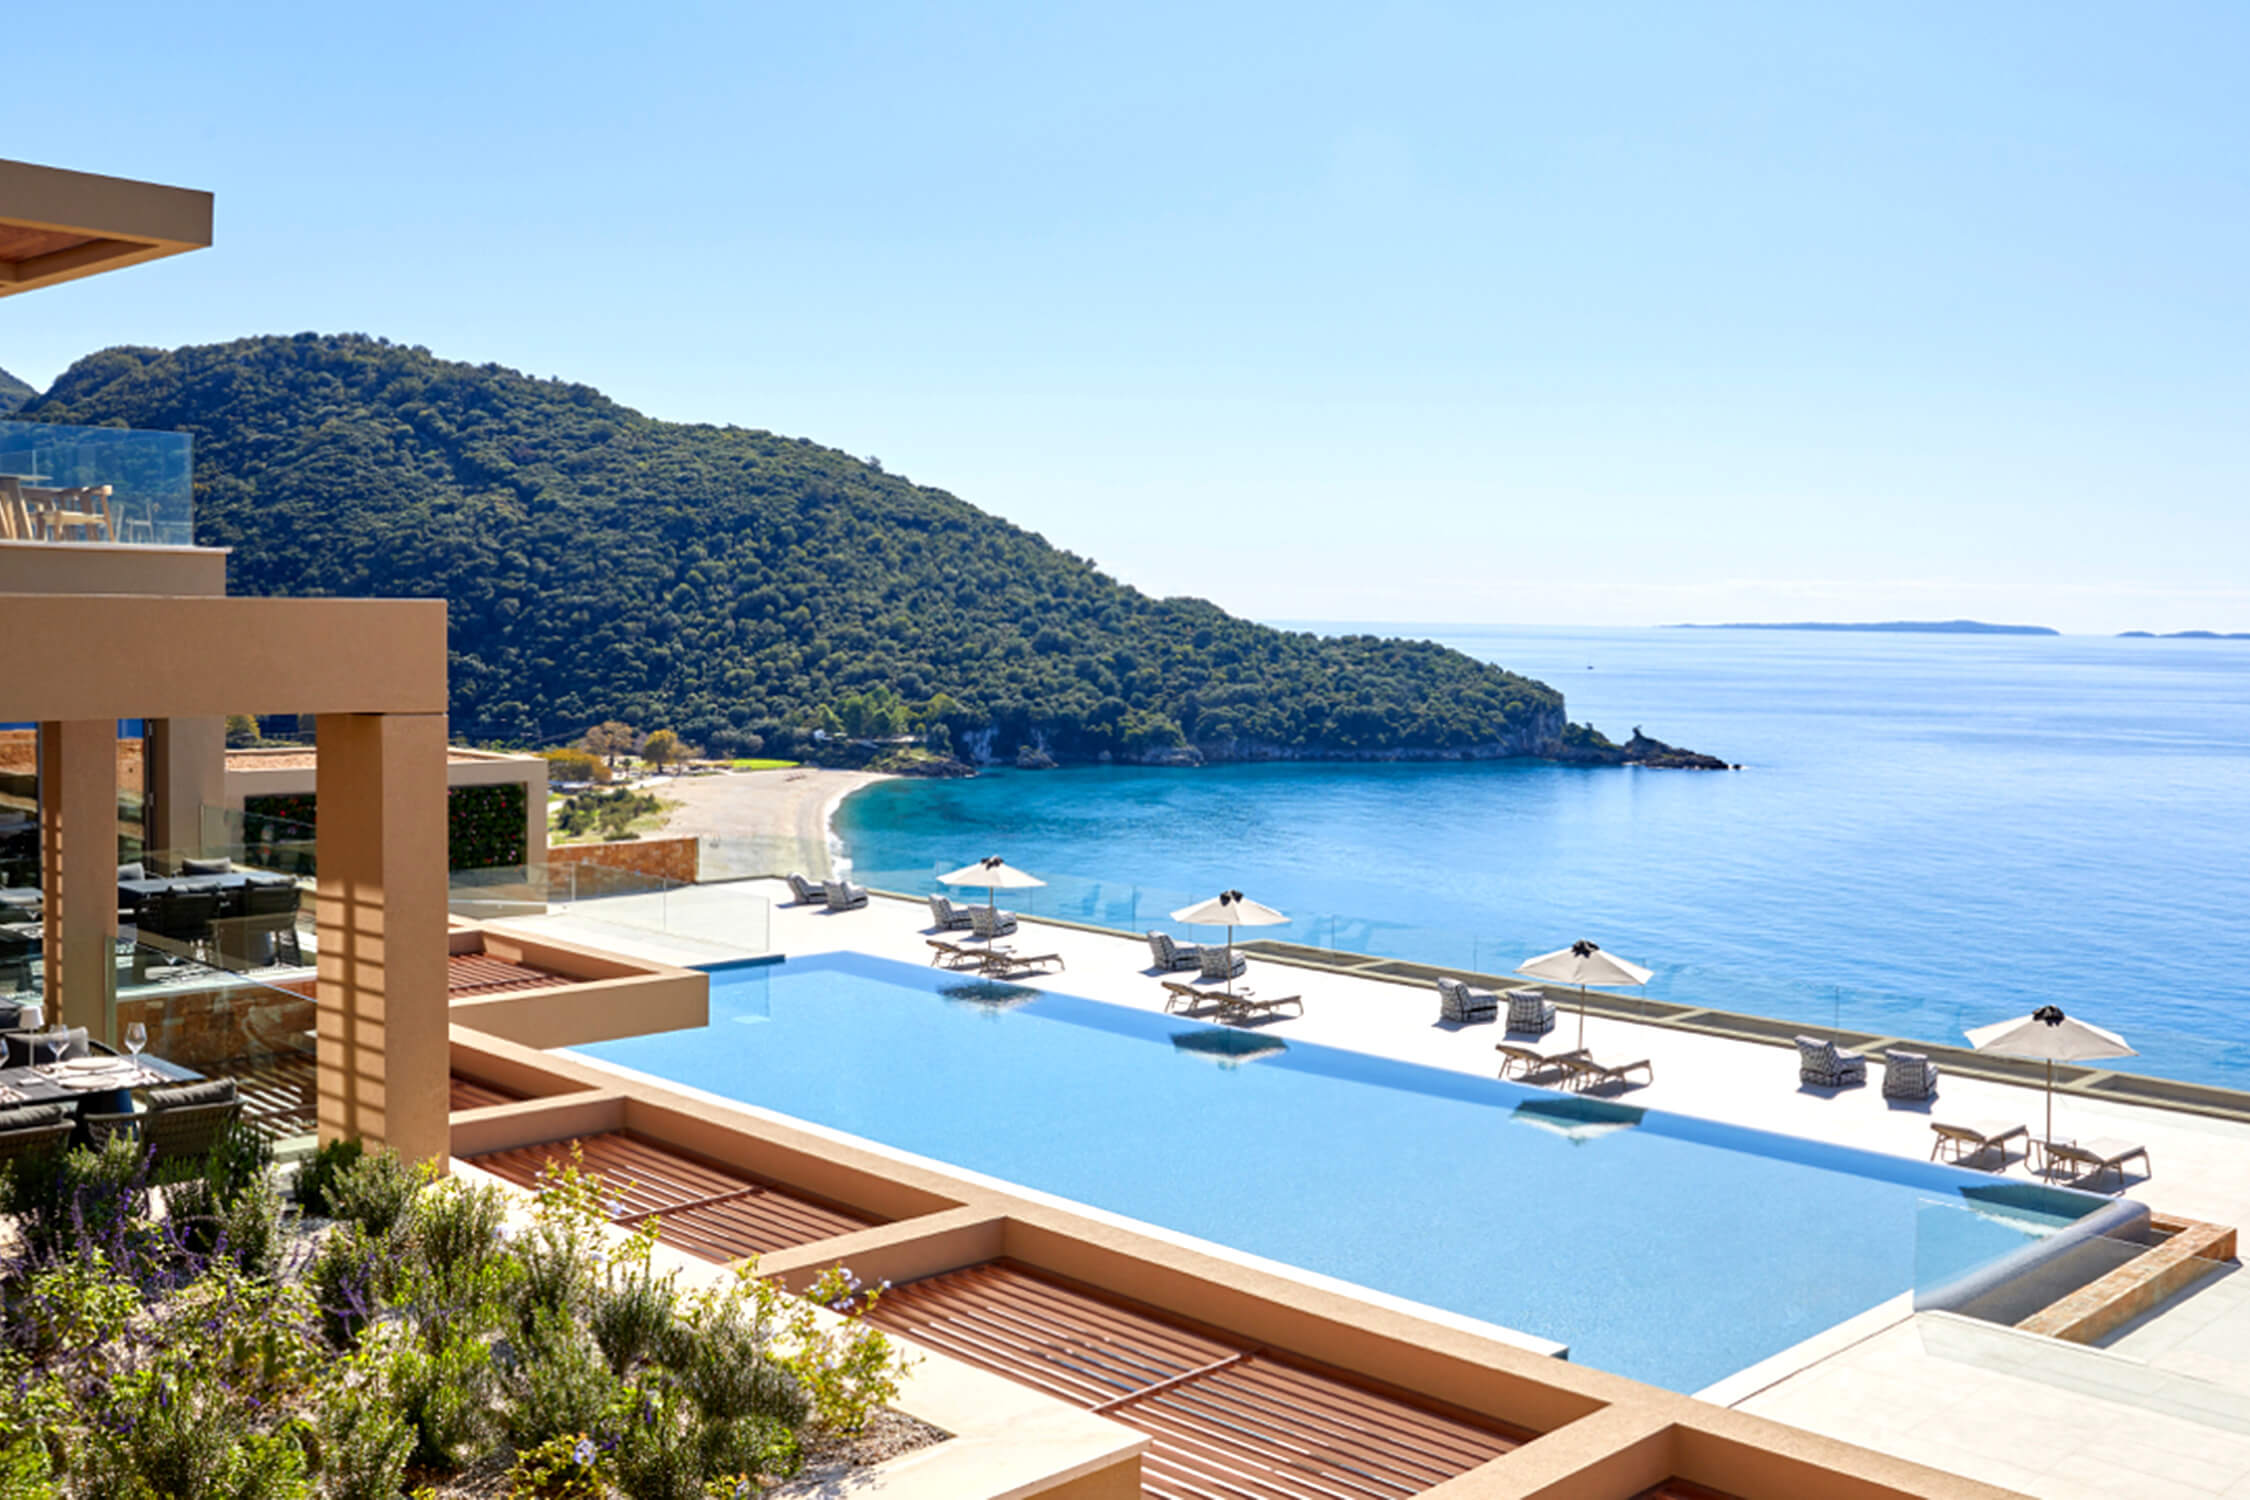 Win a holiday to Greece from The Times